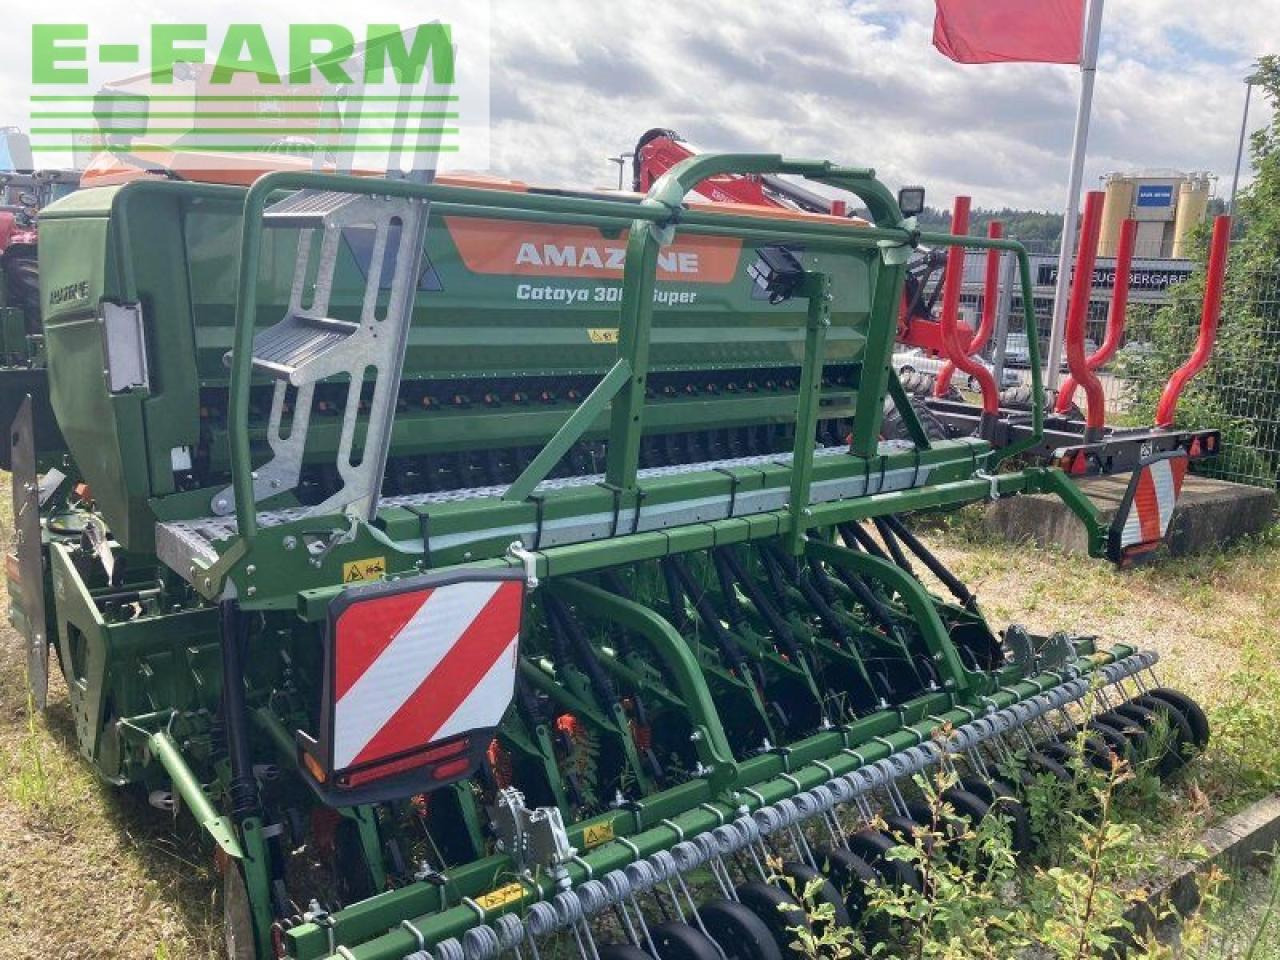 Amazone kg 3001 special + cataya 3000 super - Seed drill: picture 4